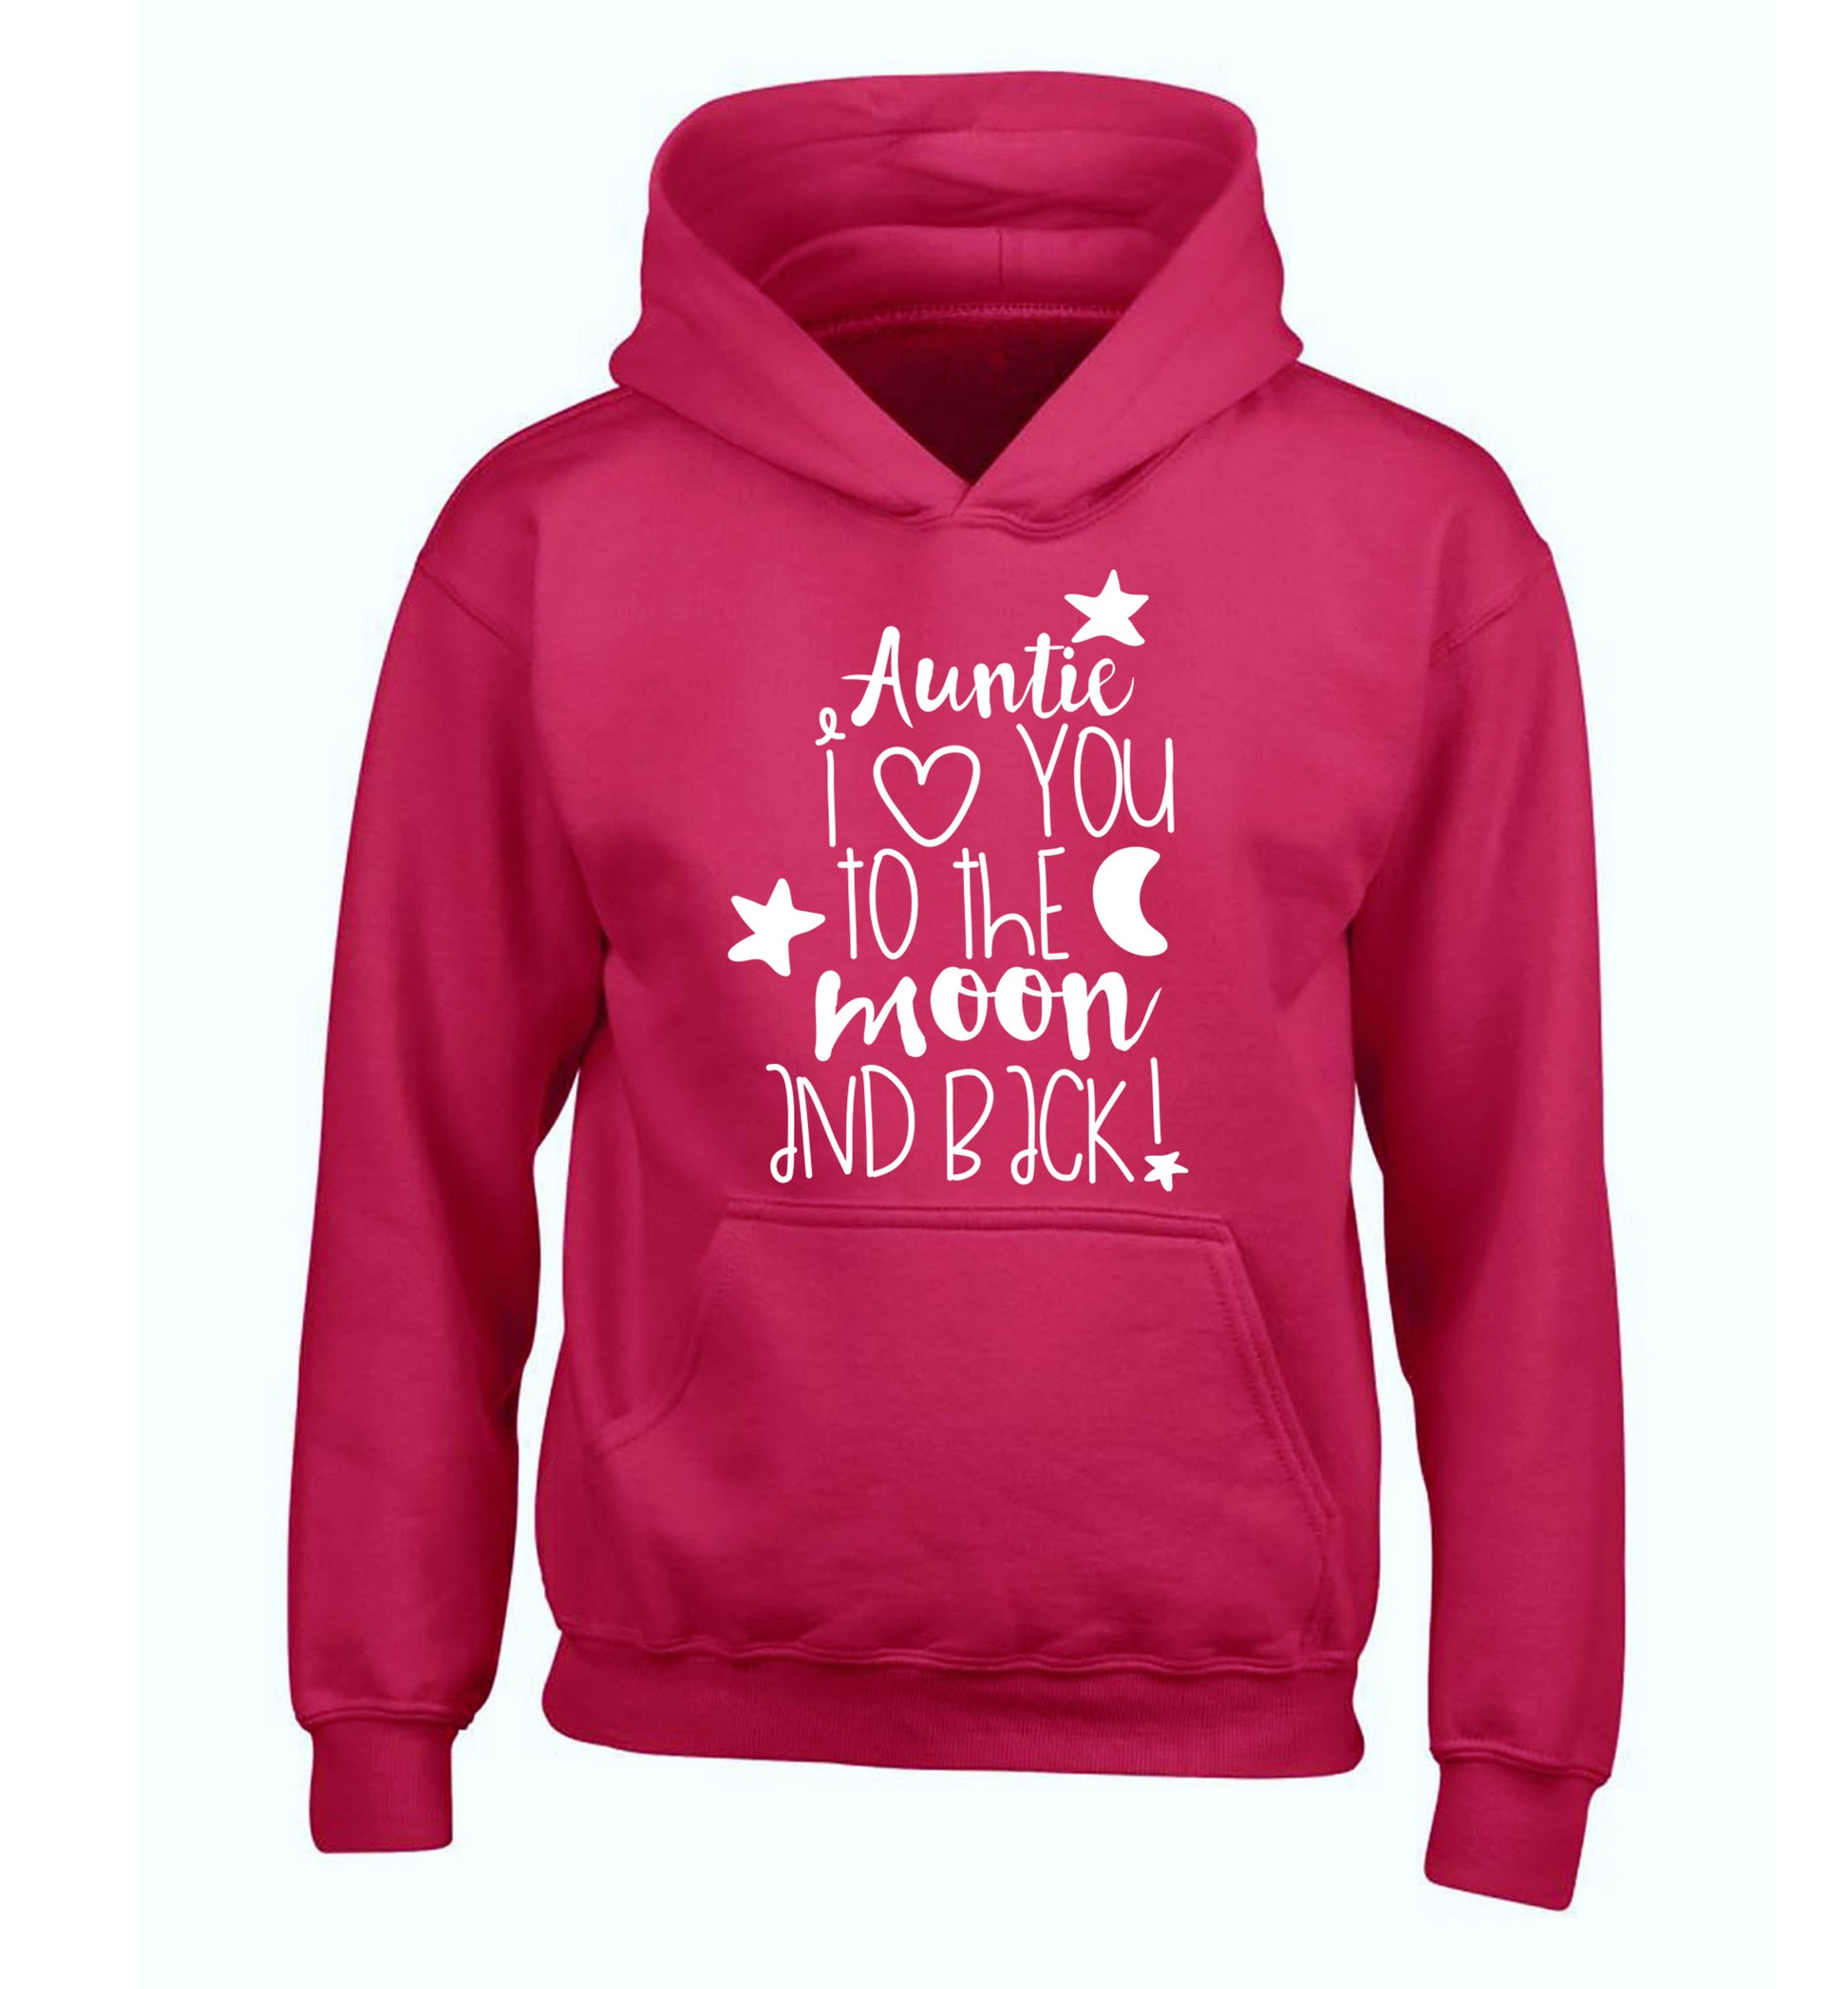 Auntie I love you to the moon and back children's pink hoodie 12-14 Years